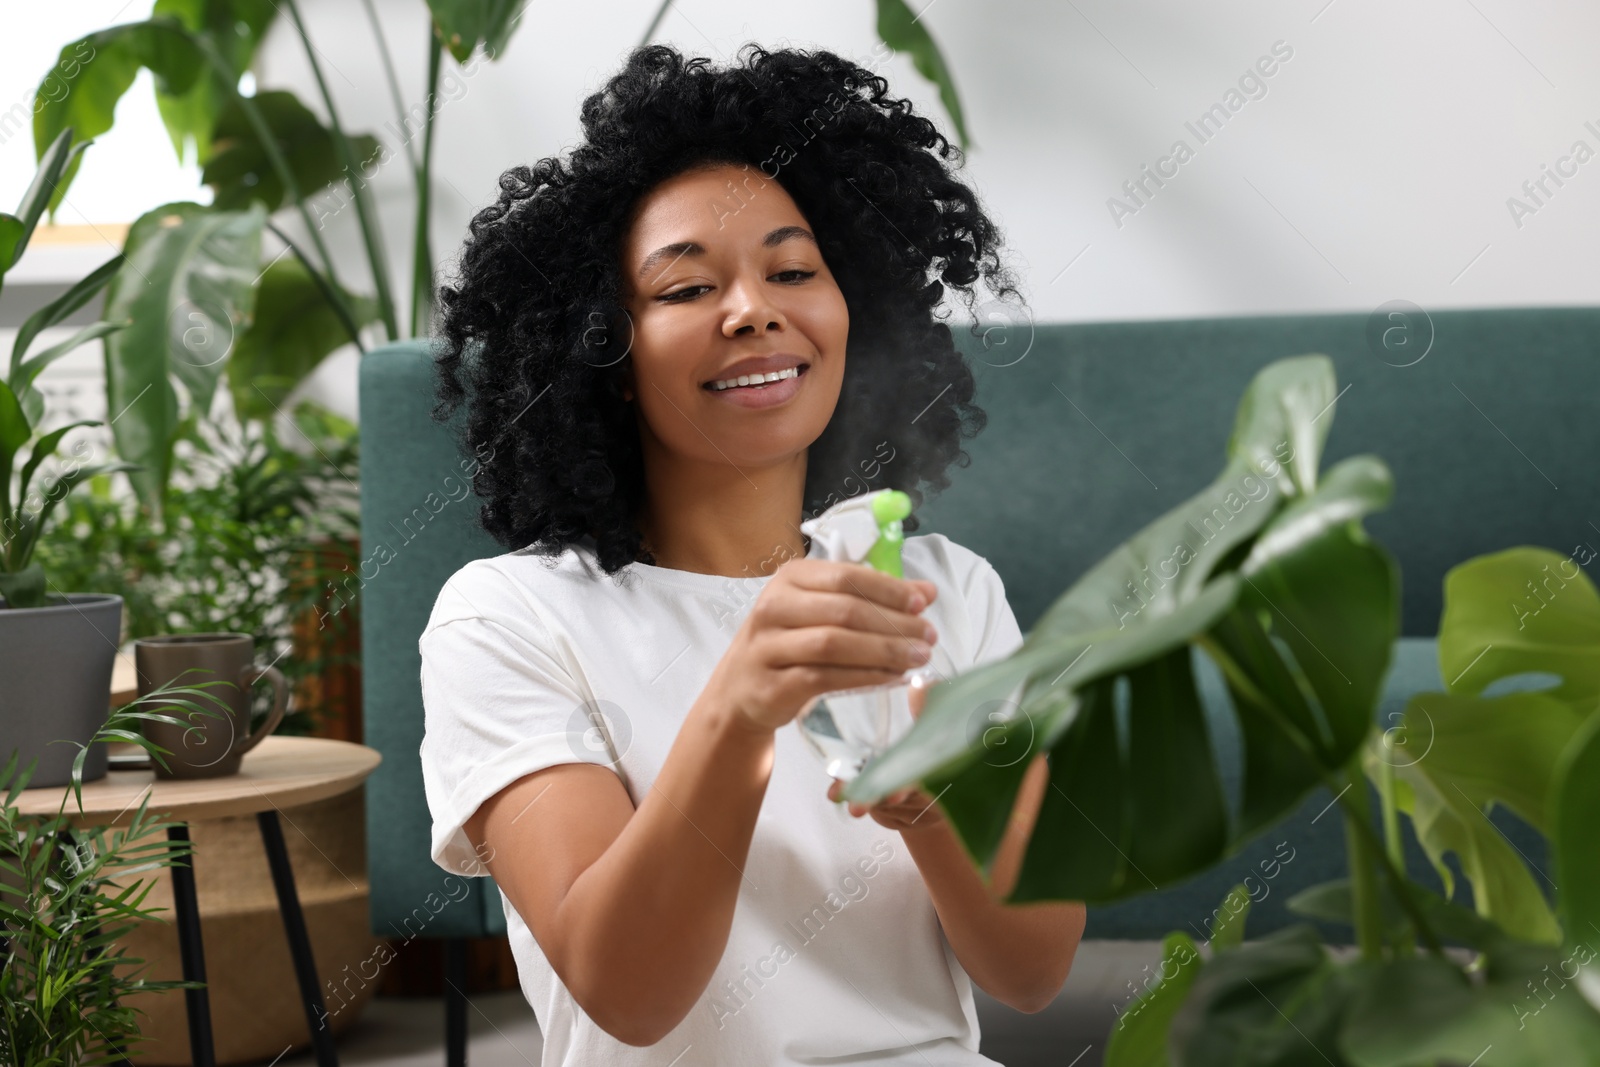 Photo of Houseplant care. Woman spraying beautiful monstera with water indoors. Houseplant care